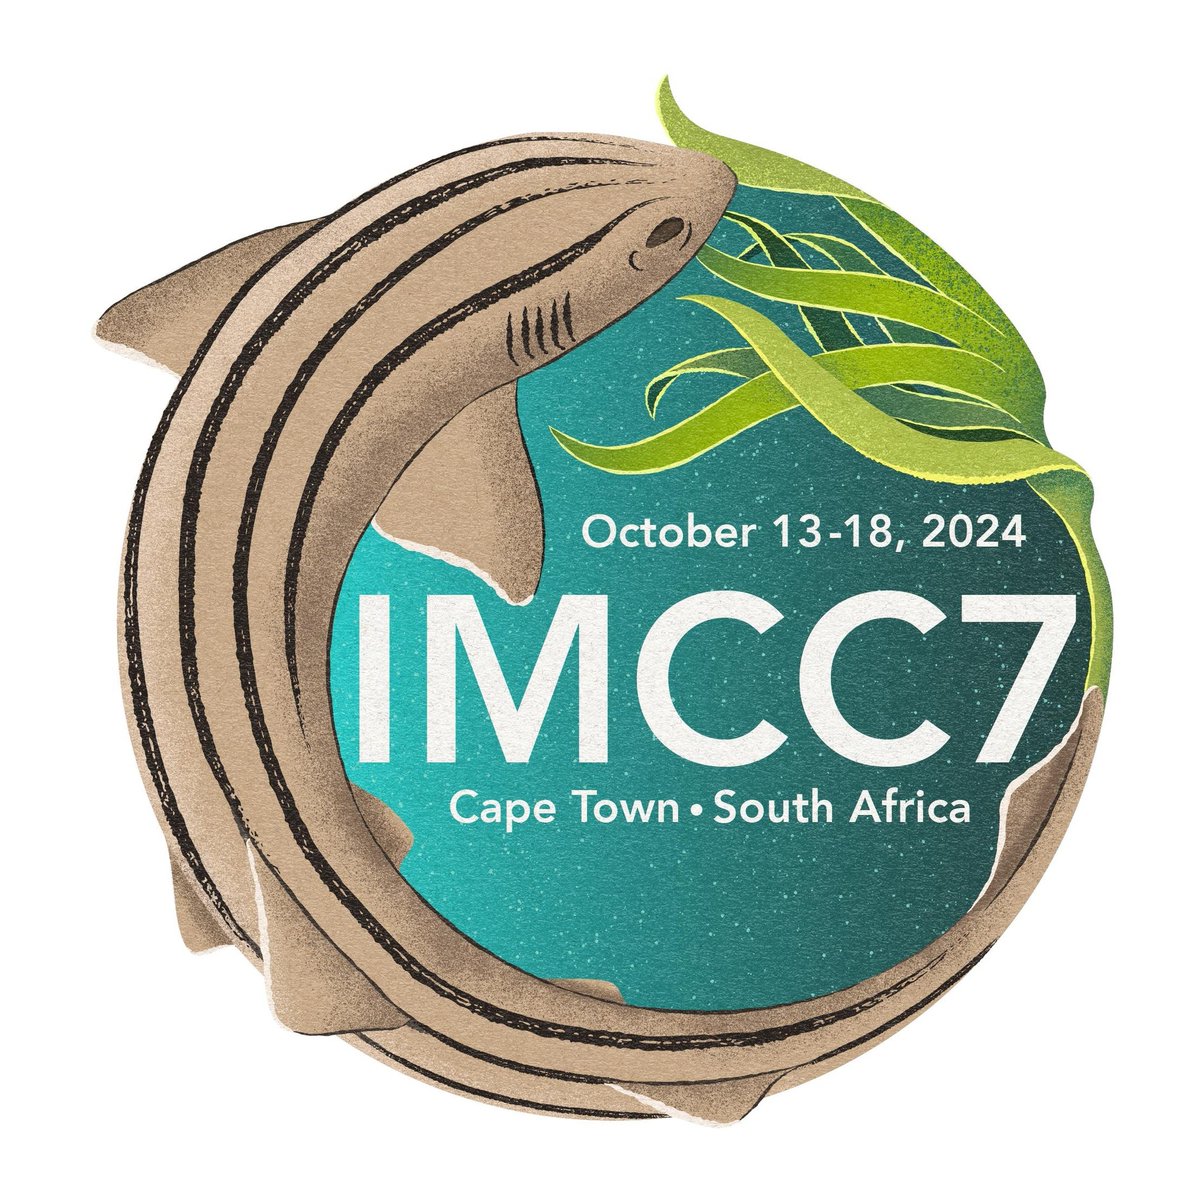 The upcoming IMCC: International Marine Conservation Congress is now accepting nominations for plenary speakers! Submit nominations (self nominations ok) by February 9th forms.gle/h9nxsGtchyssPf…